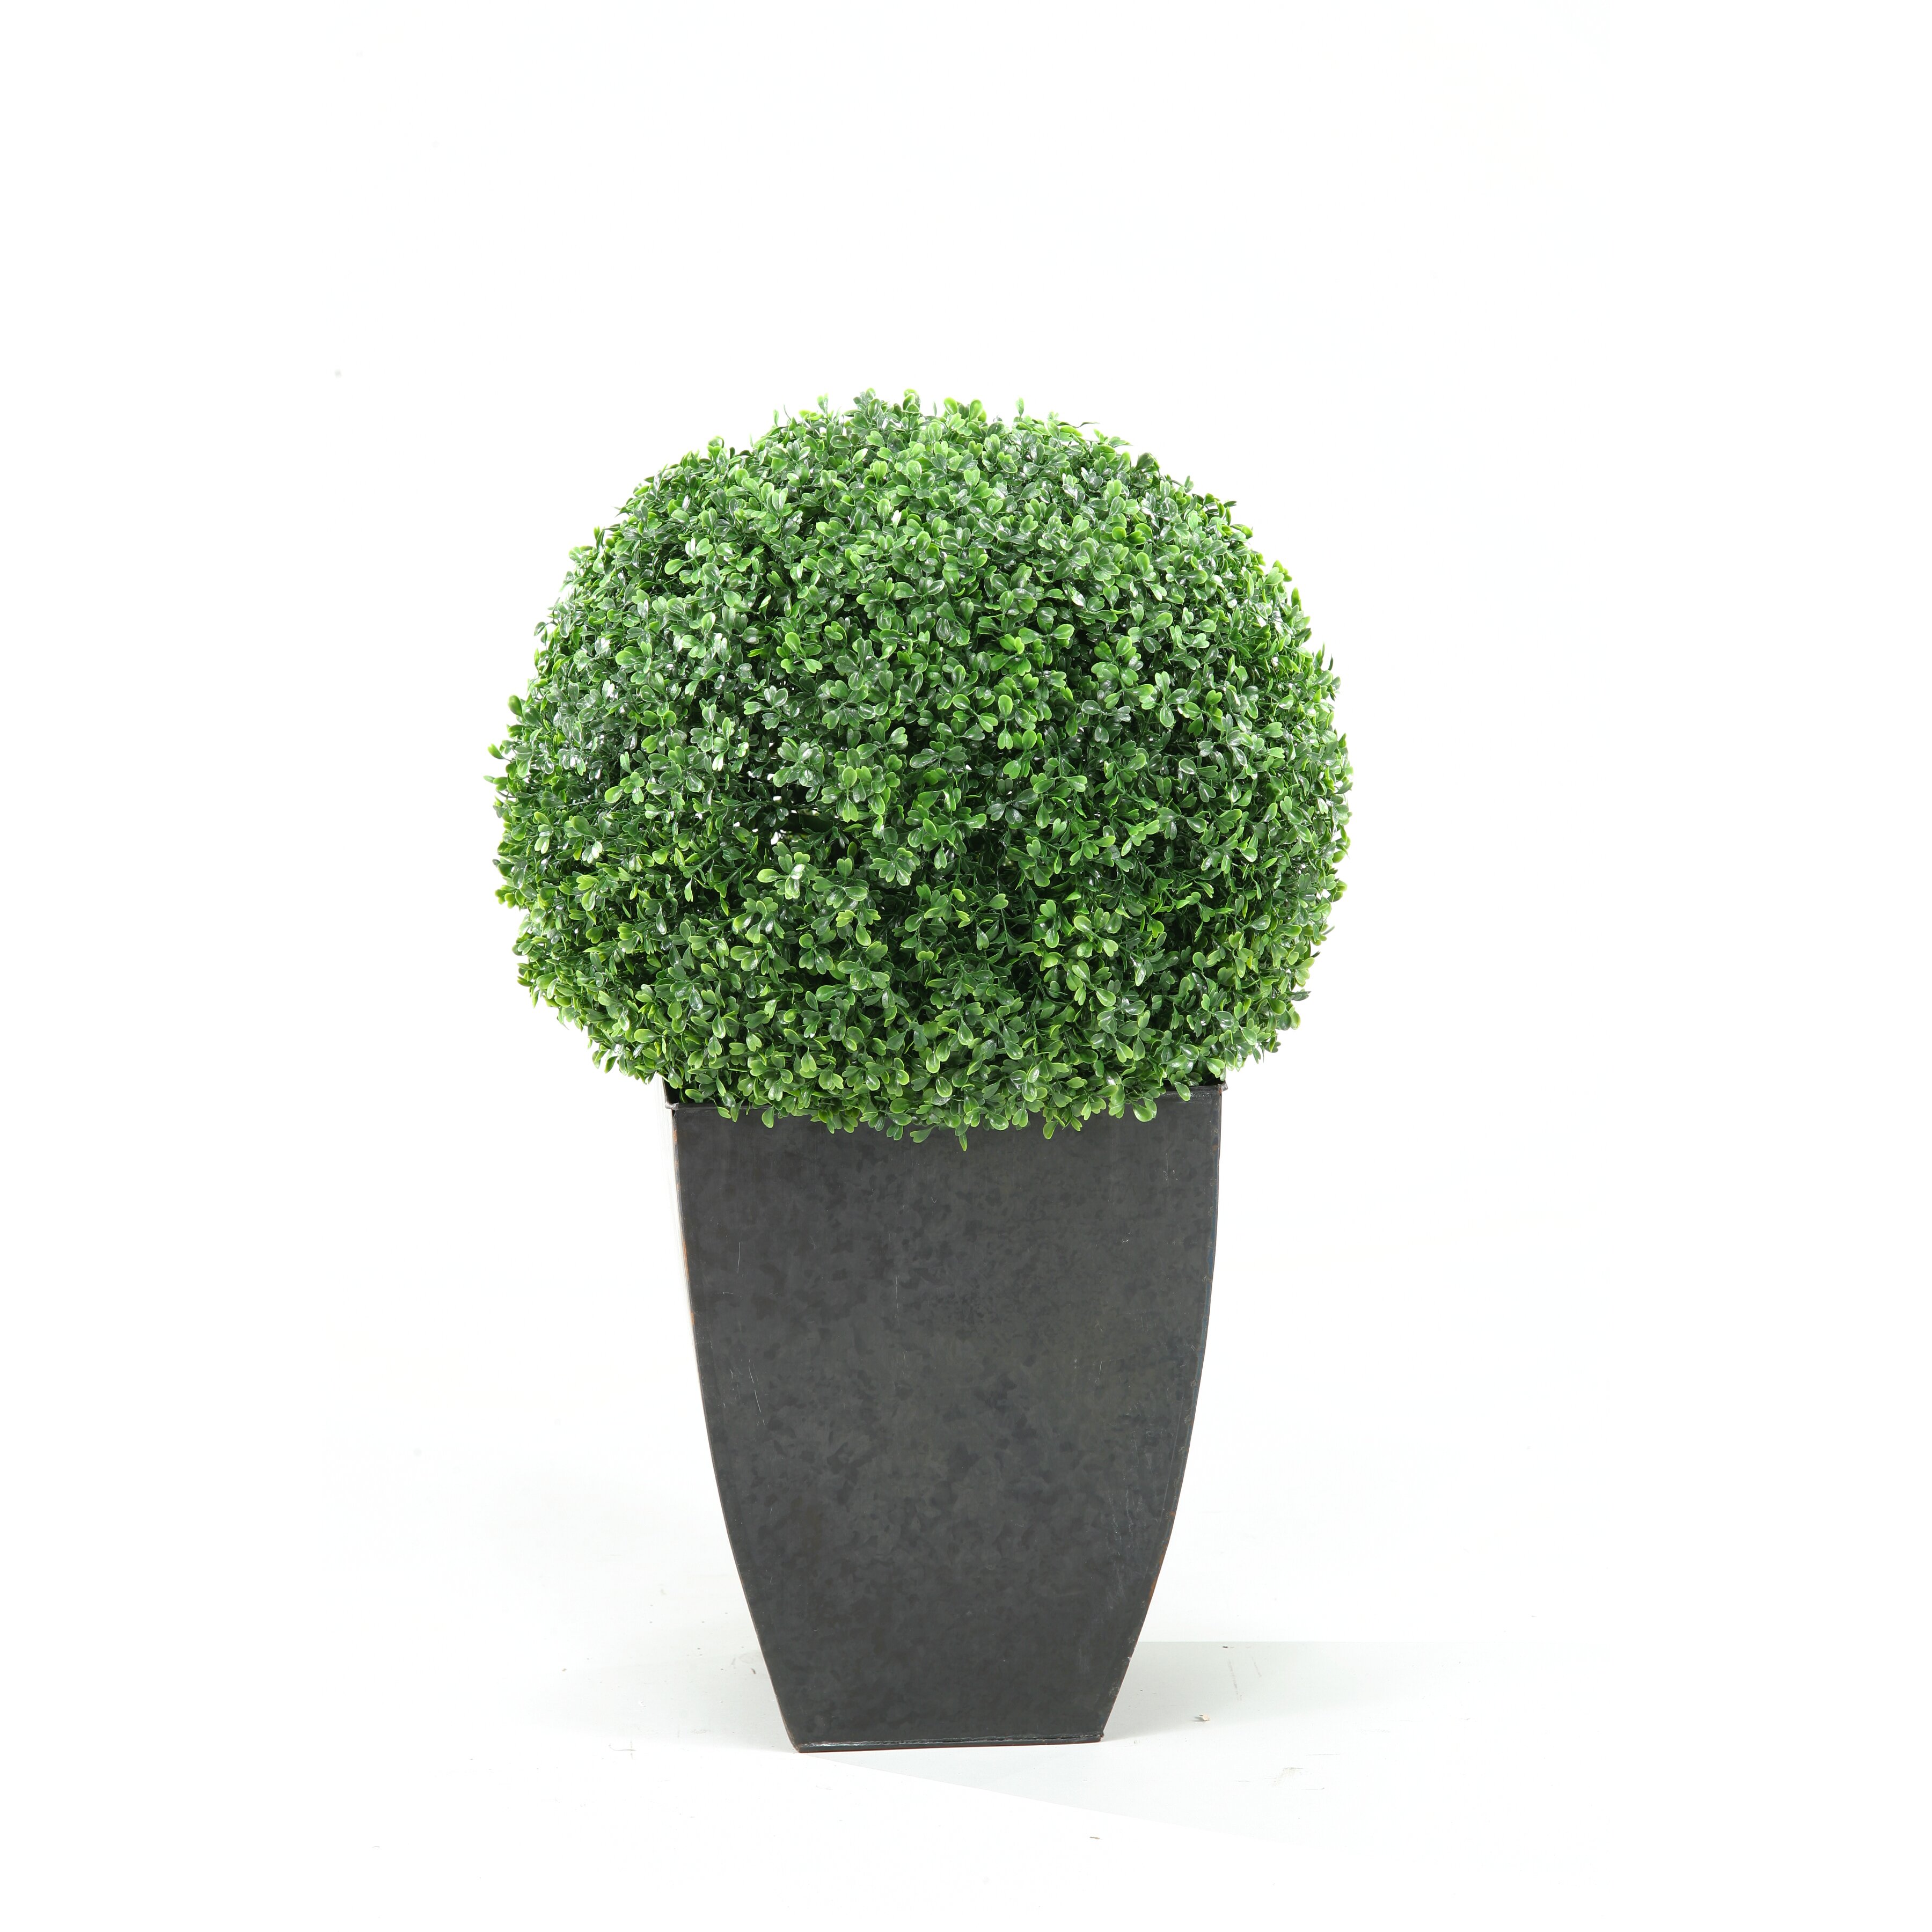 D & W Silks Boxwood Ball Square Topiary in Planter & Reviews | Wayfair